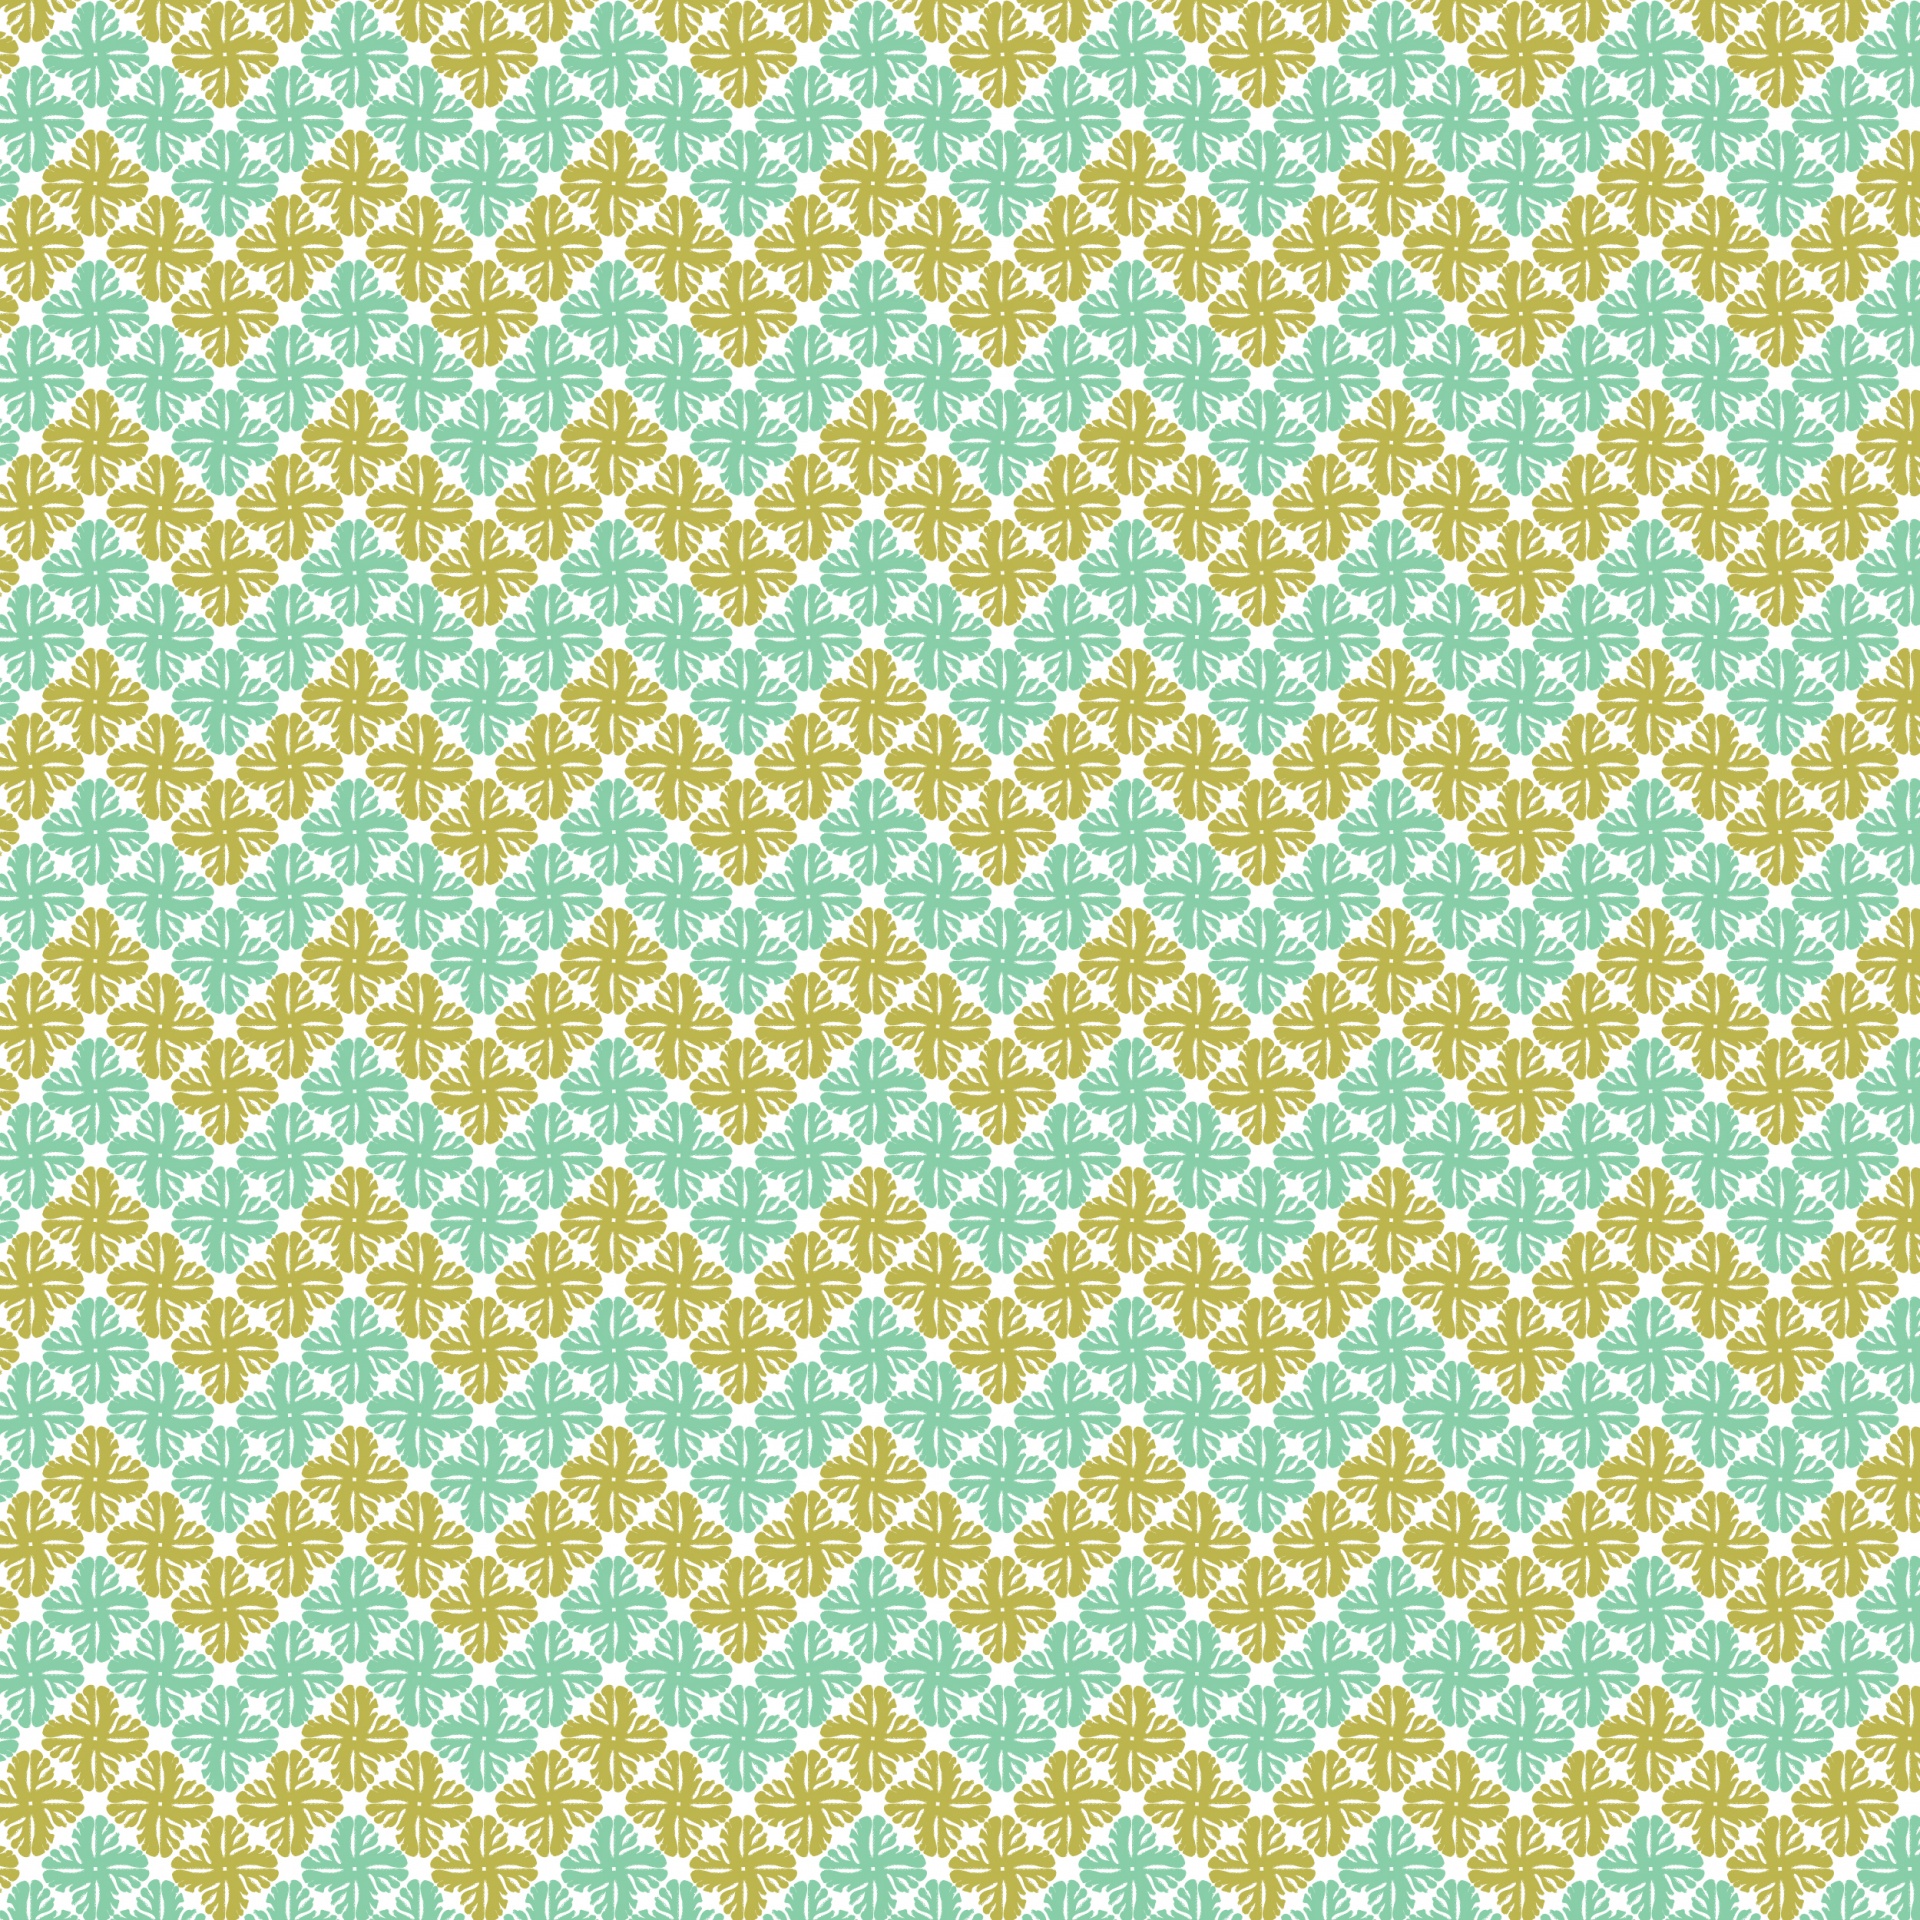 Abstract Seamless Floral Pattern